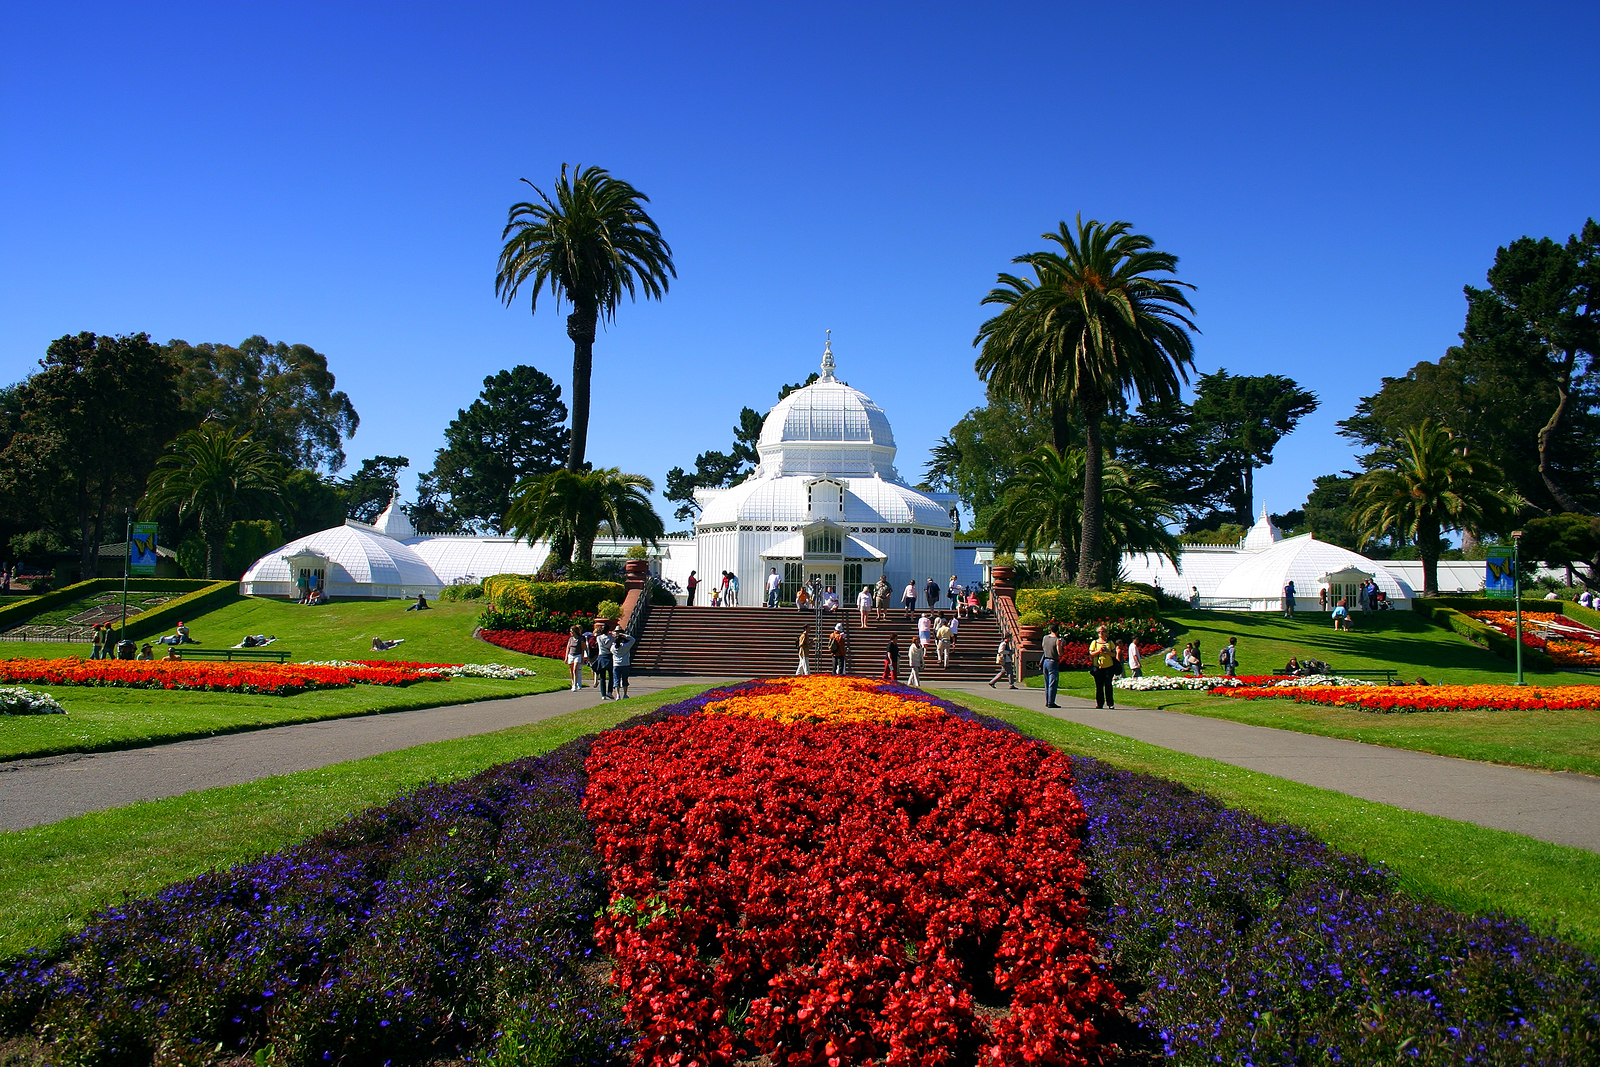 View of the Conservatory of Flowers in Golden Gate Par